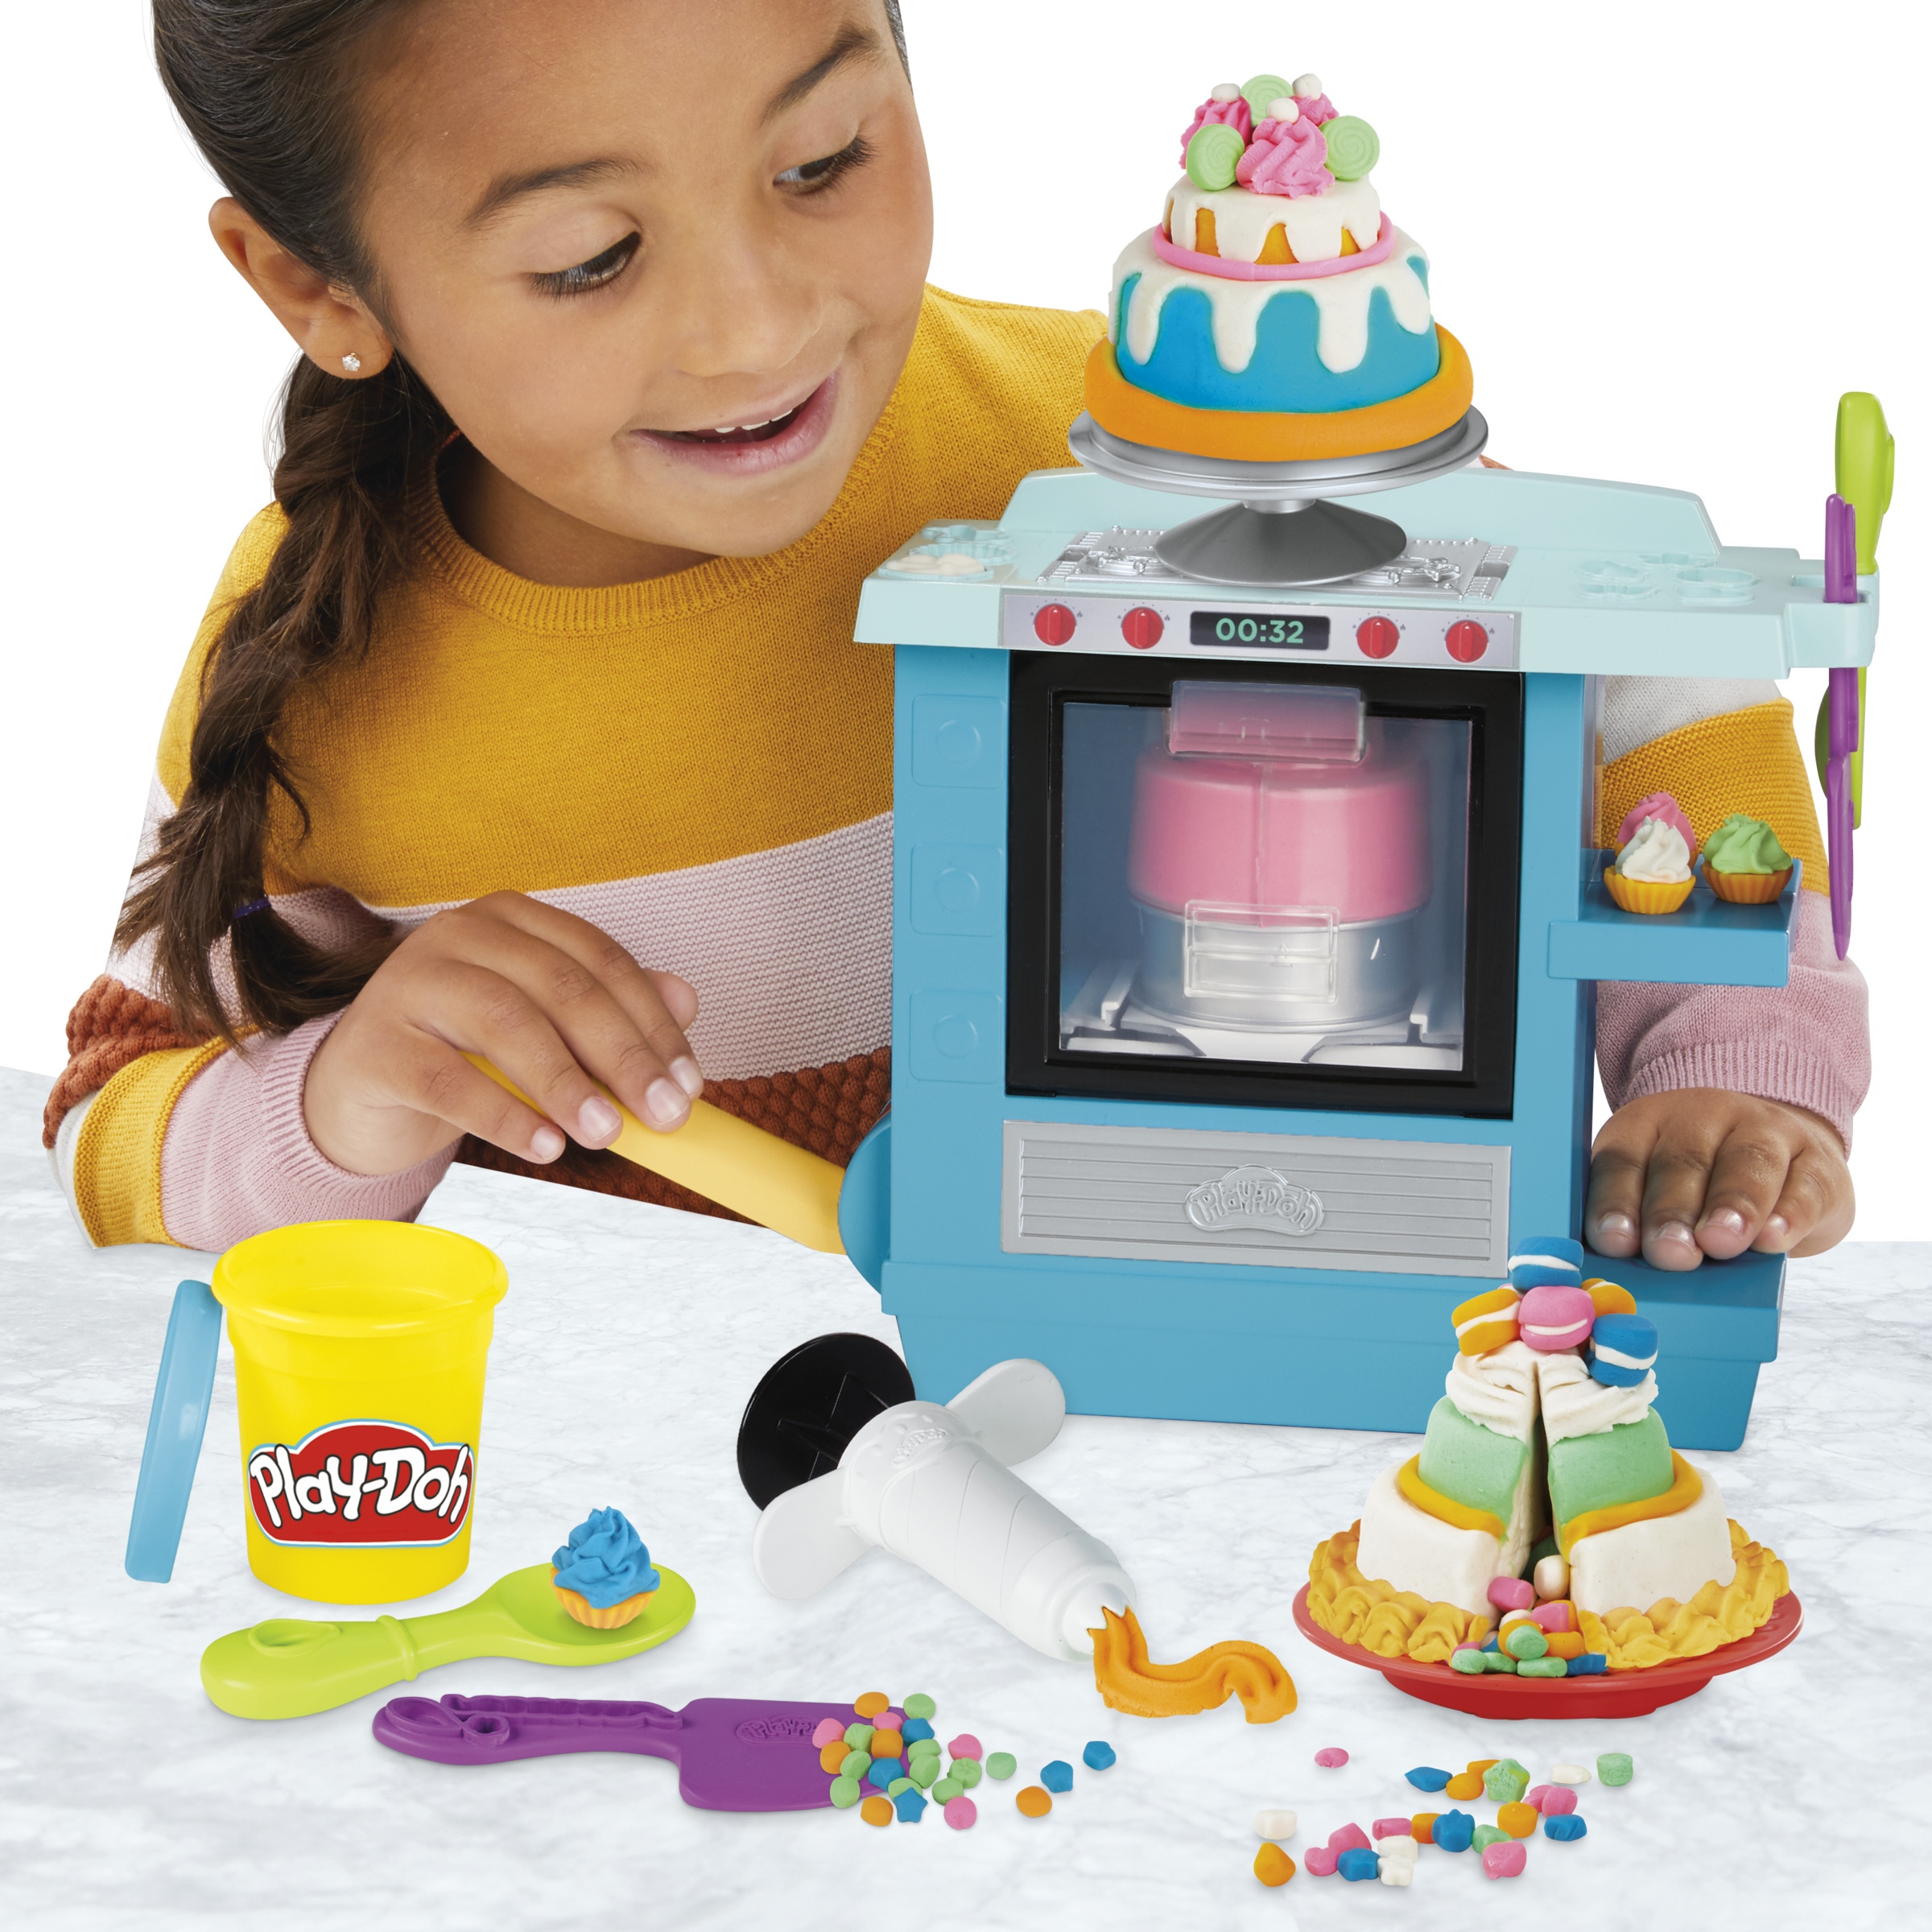 Play-doh cakes F1321 - Play-Doh